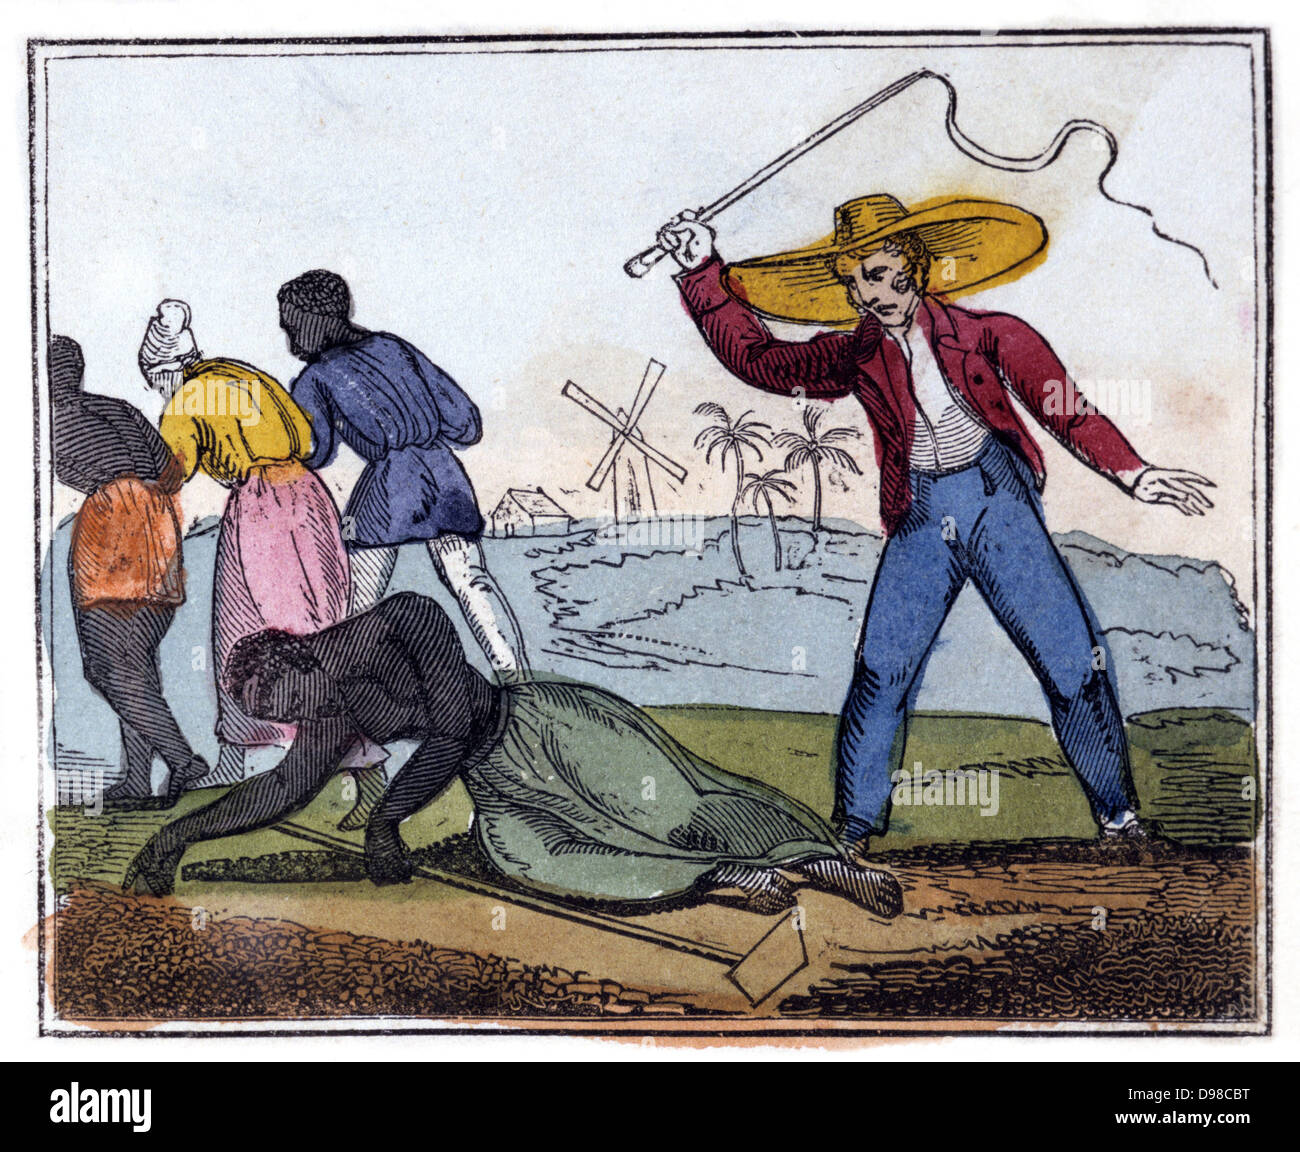 Whipping of Enslaved People, Nature & Impact